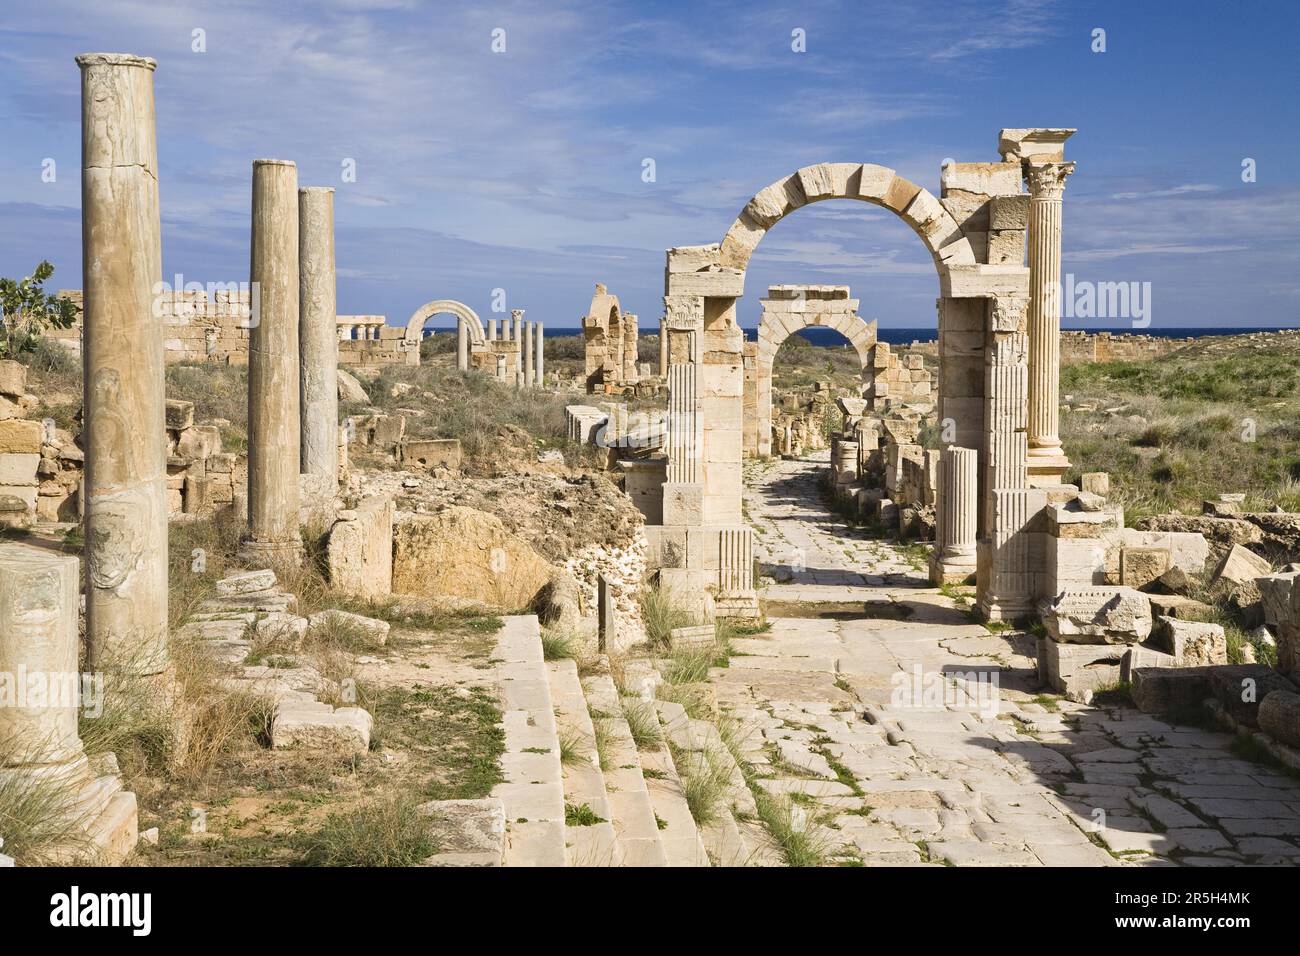 Arch of Trajan, in front of Arch of Tiberius, Via Trionfale, ruined city of Leptis Magna, Libya Stock Photo